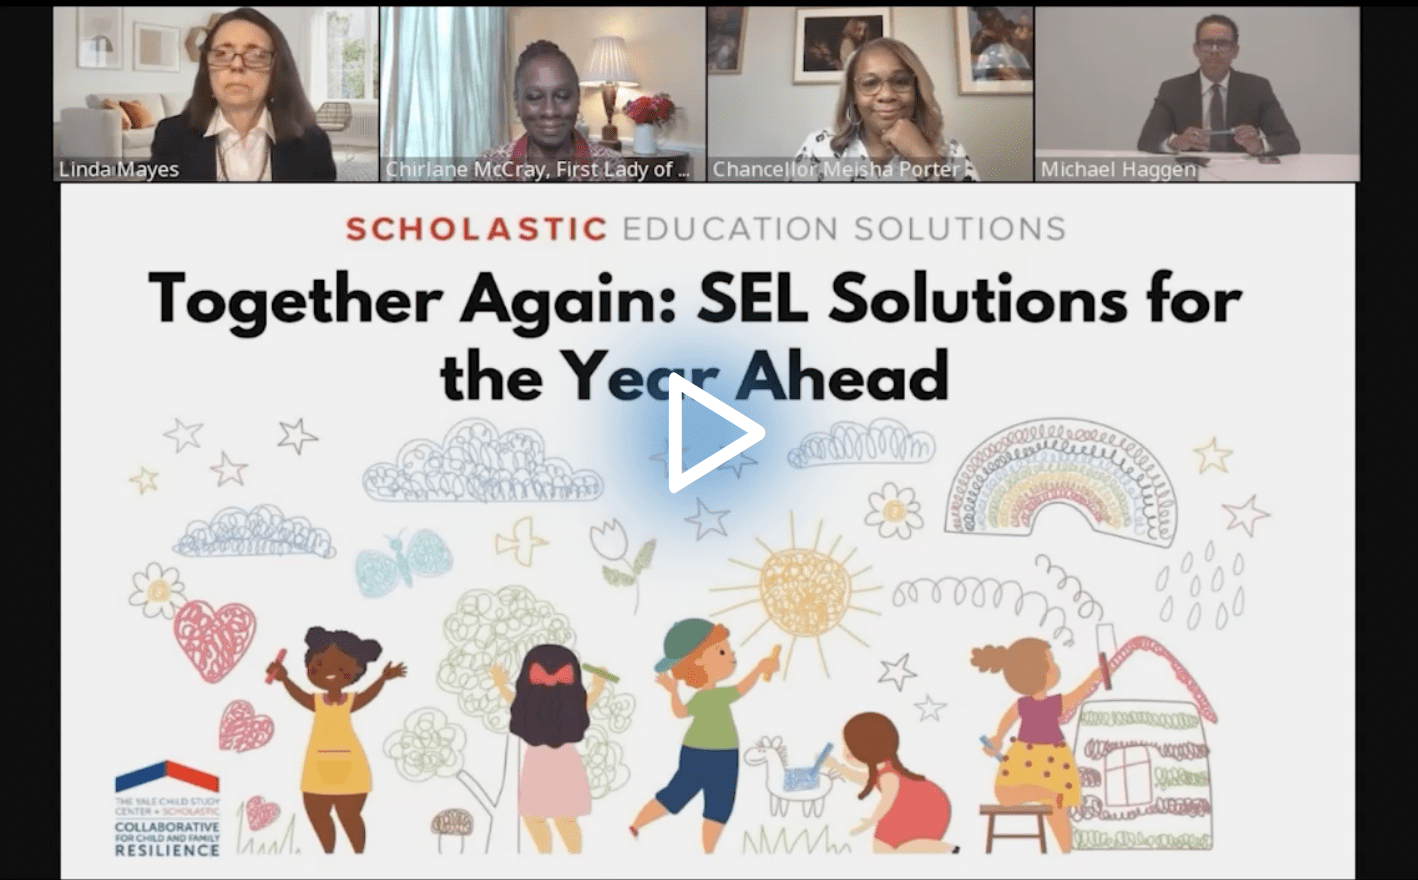 Together Again: SEL Solutions for the Year Ahead edWebinar recording link